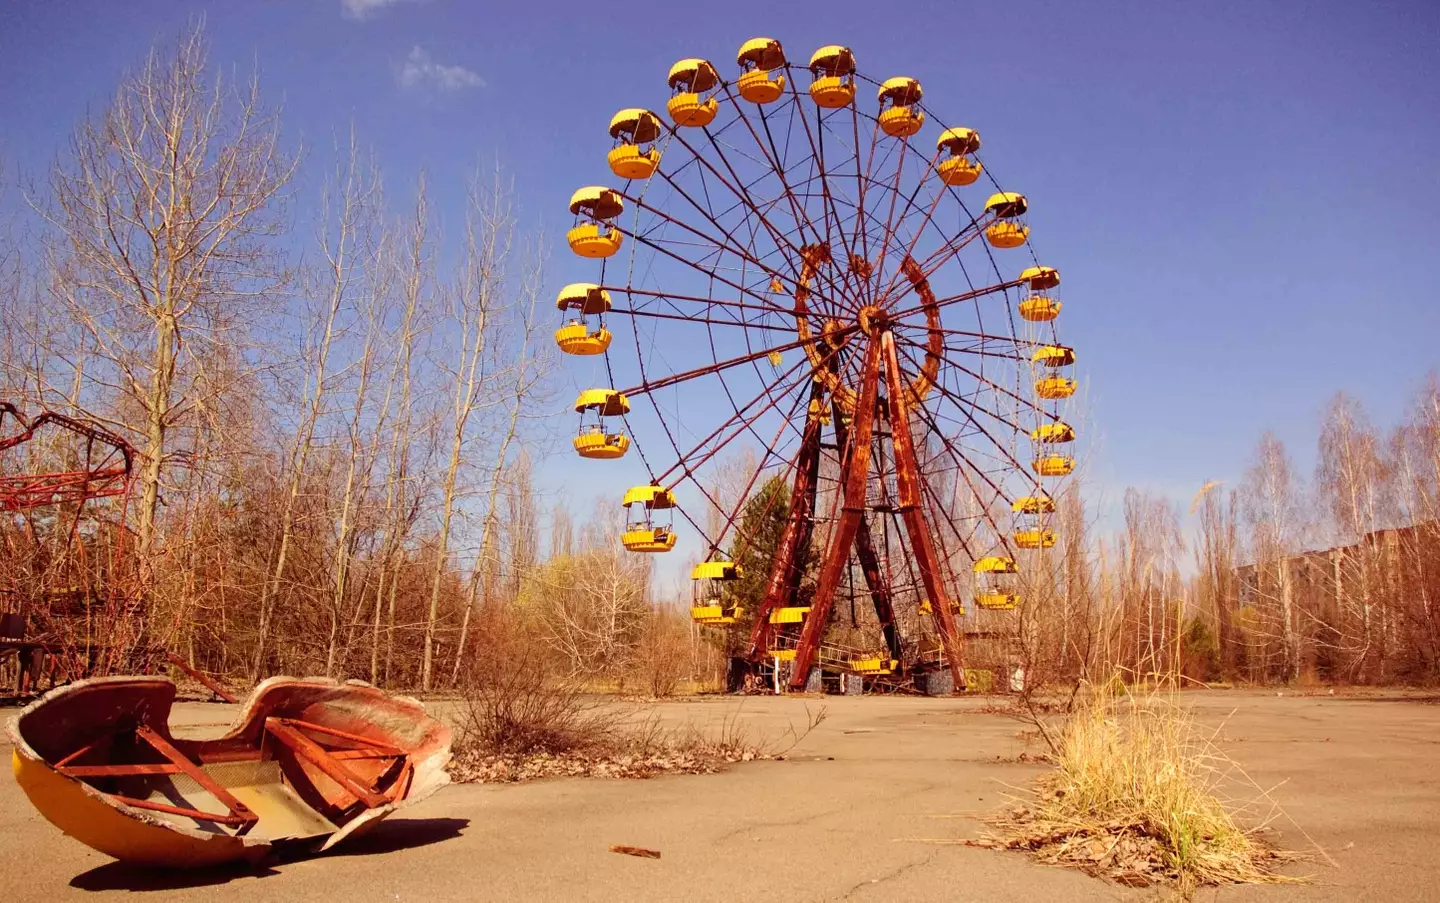 The Chernobyl disaster happened nearly 40 years ago.